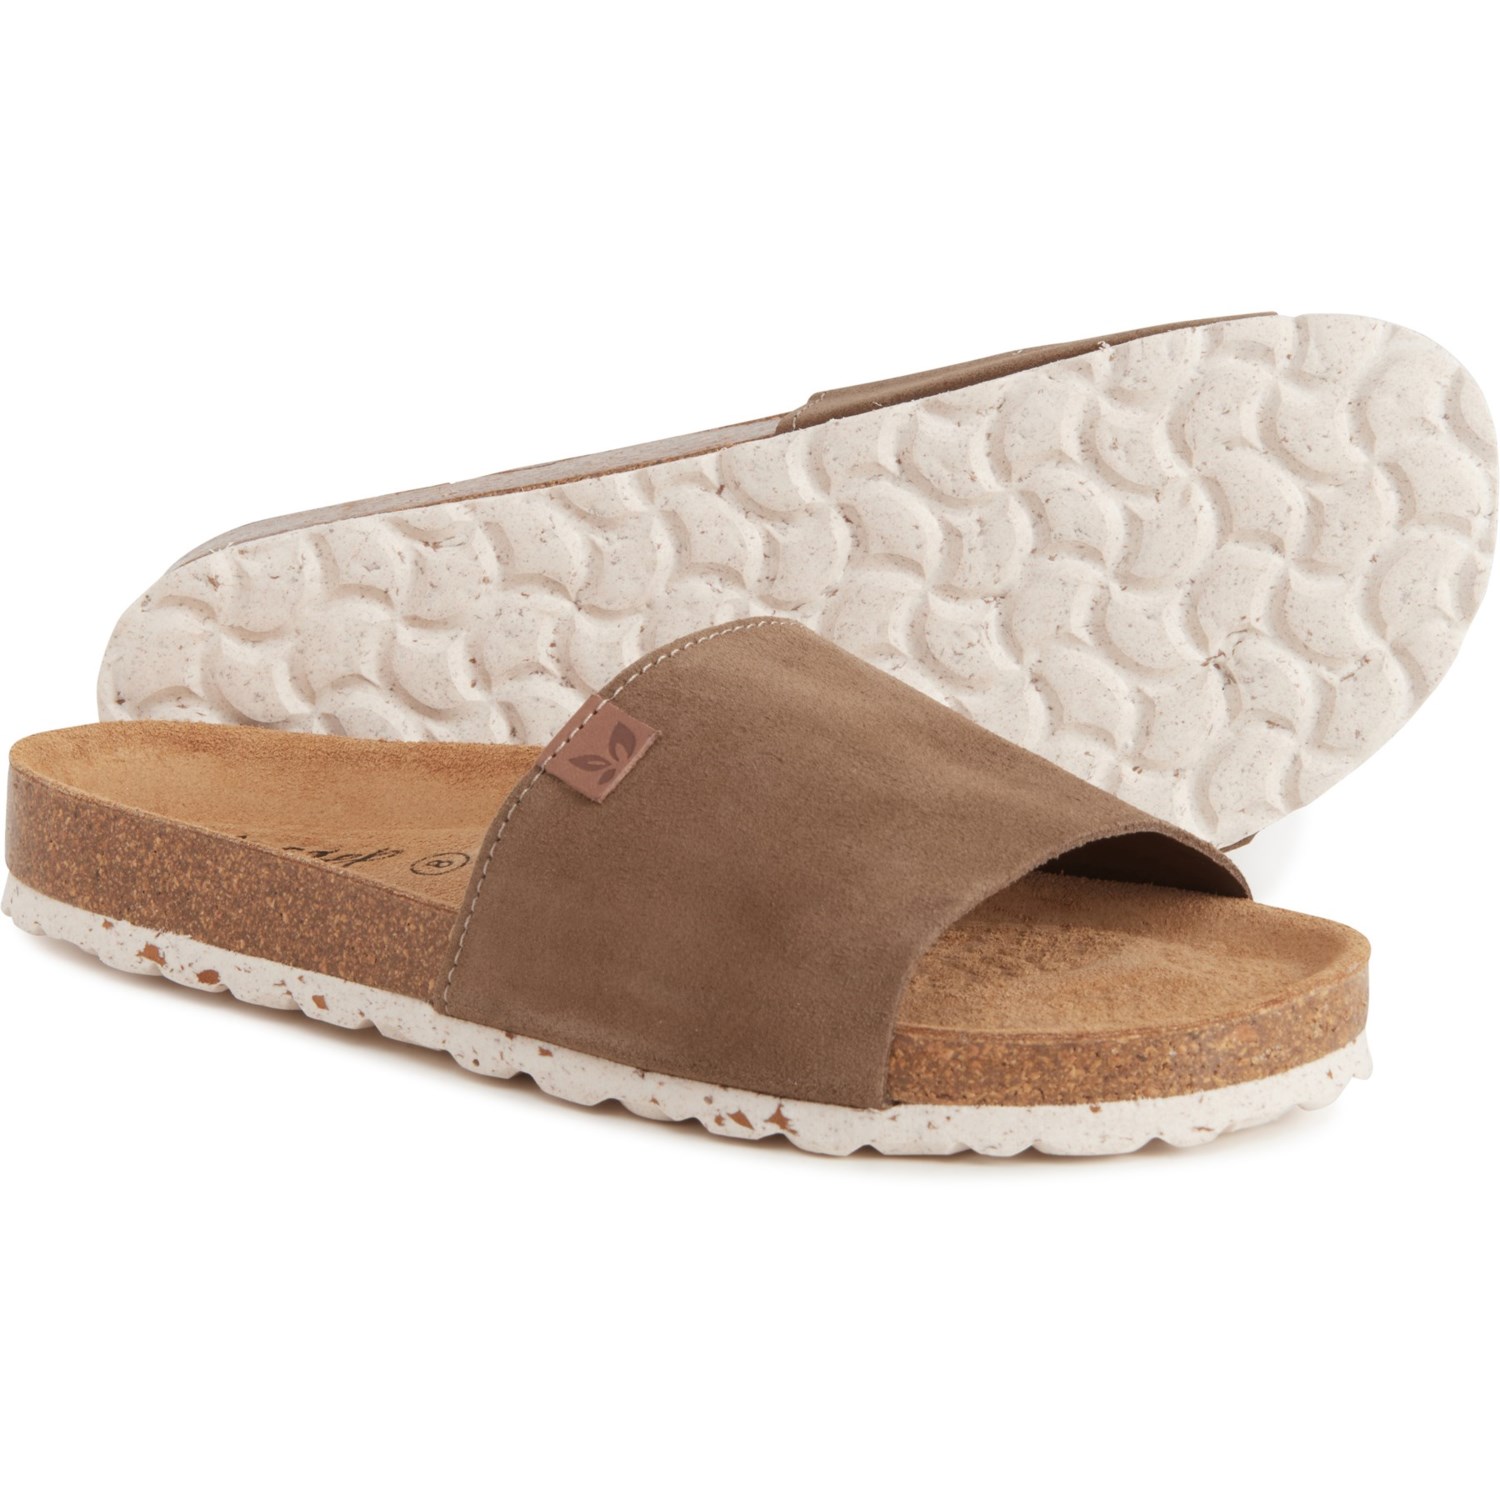 BioStep Made in Spain Slide Sandals (For Women) - Save 44%